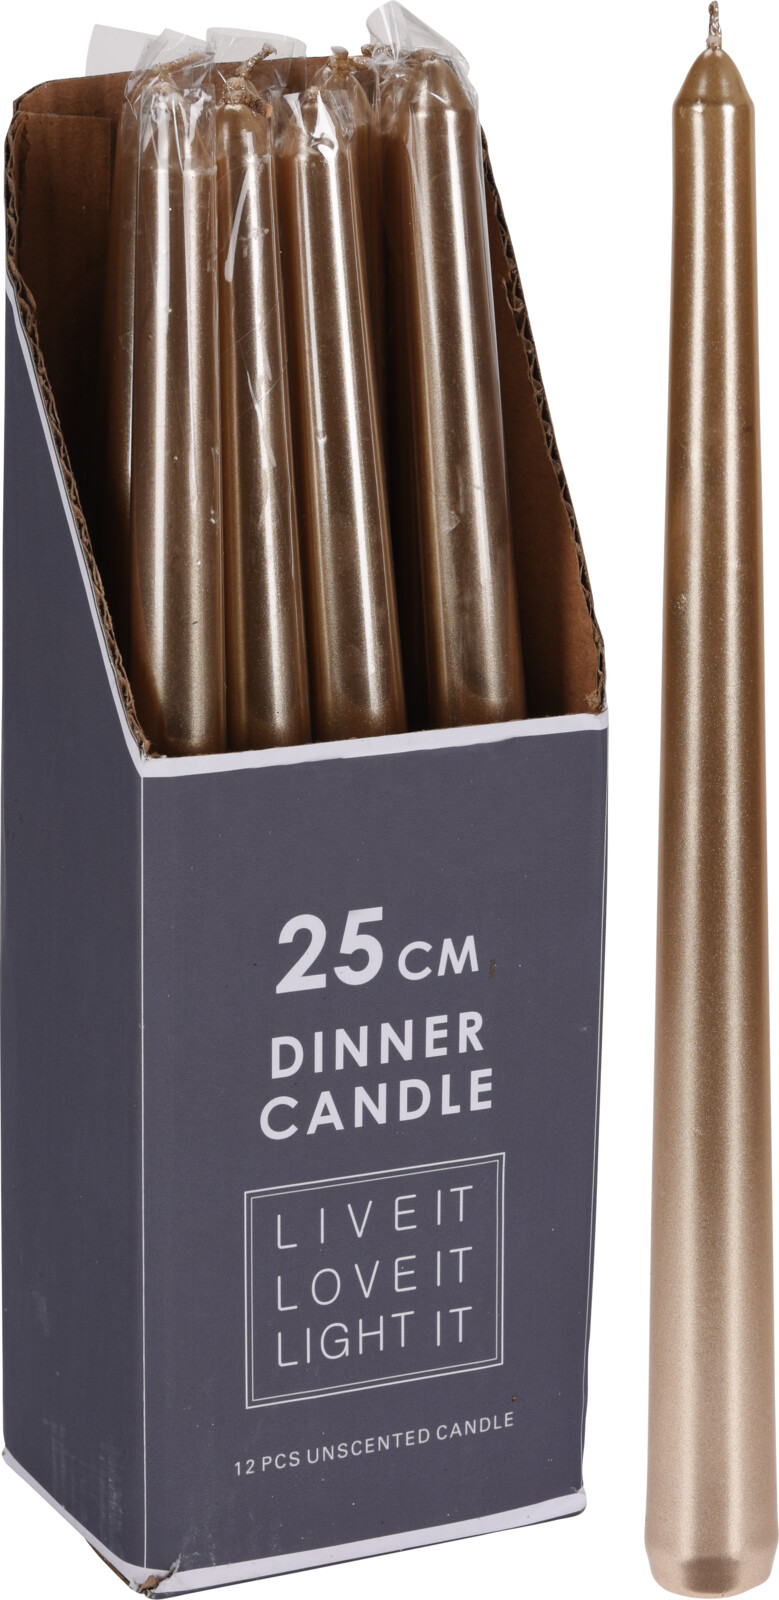 DINNER CANDLE GOLD 25CM